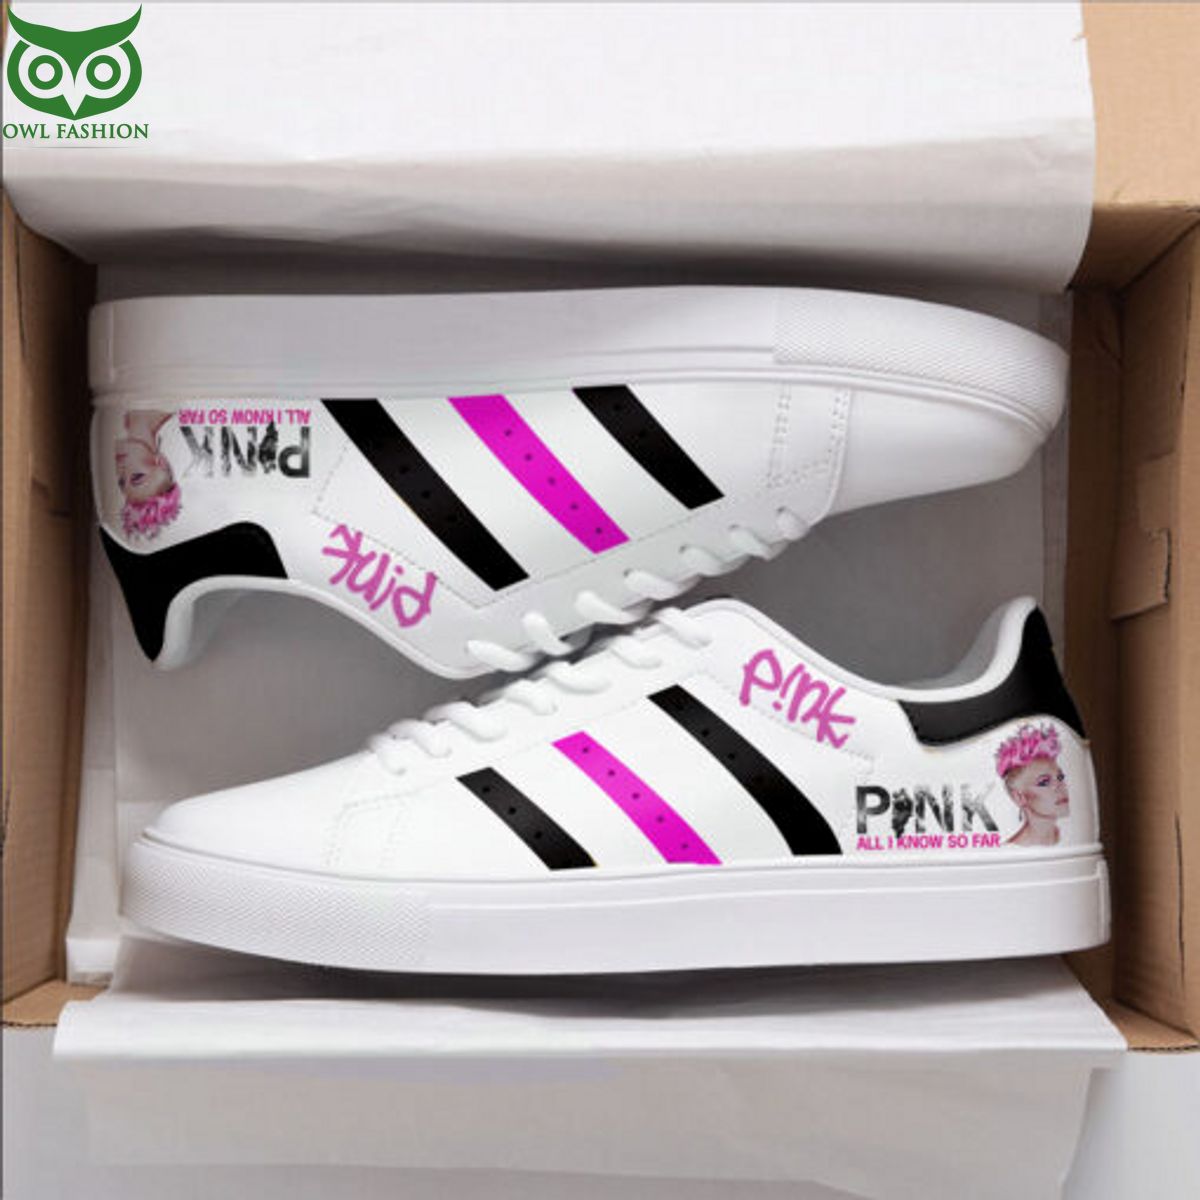 Trending P!nk Lover Black Mix Stan Smith Skate Shoes Cool look bro